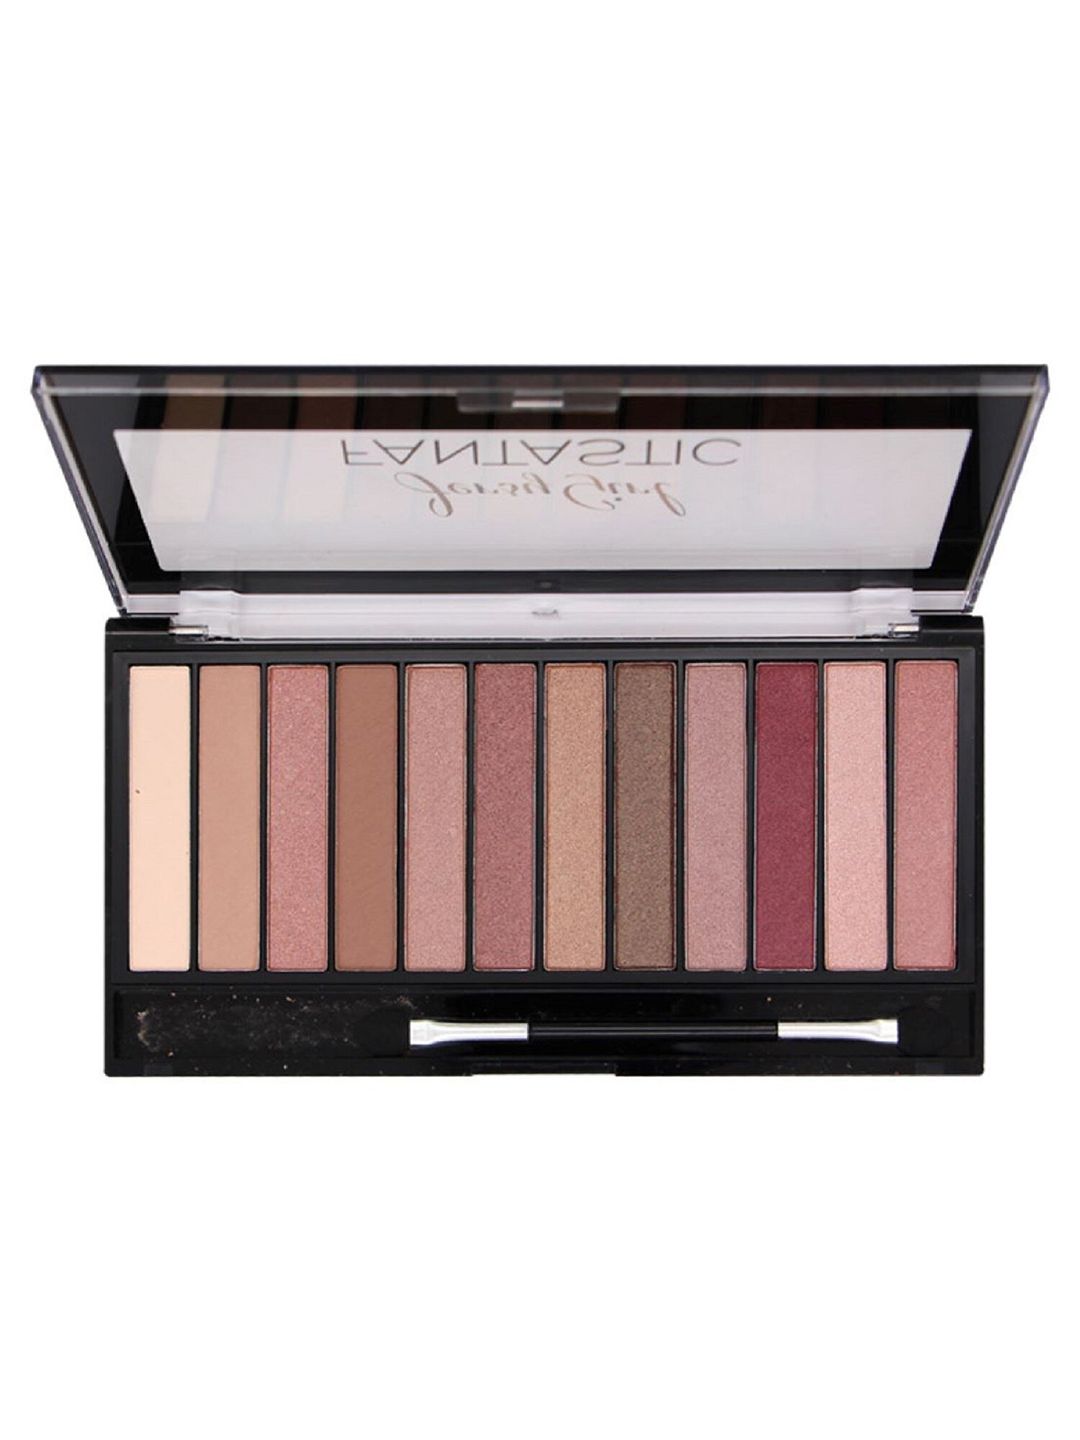 Fashion Colour Jersy Girl Fantastic Eyeshadow Palette - Shade 02 Price in India